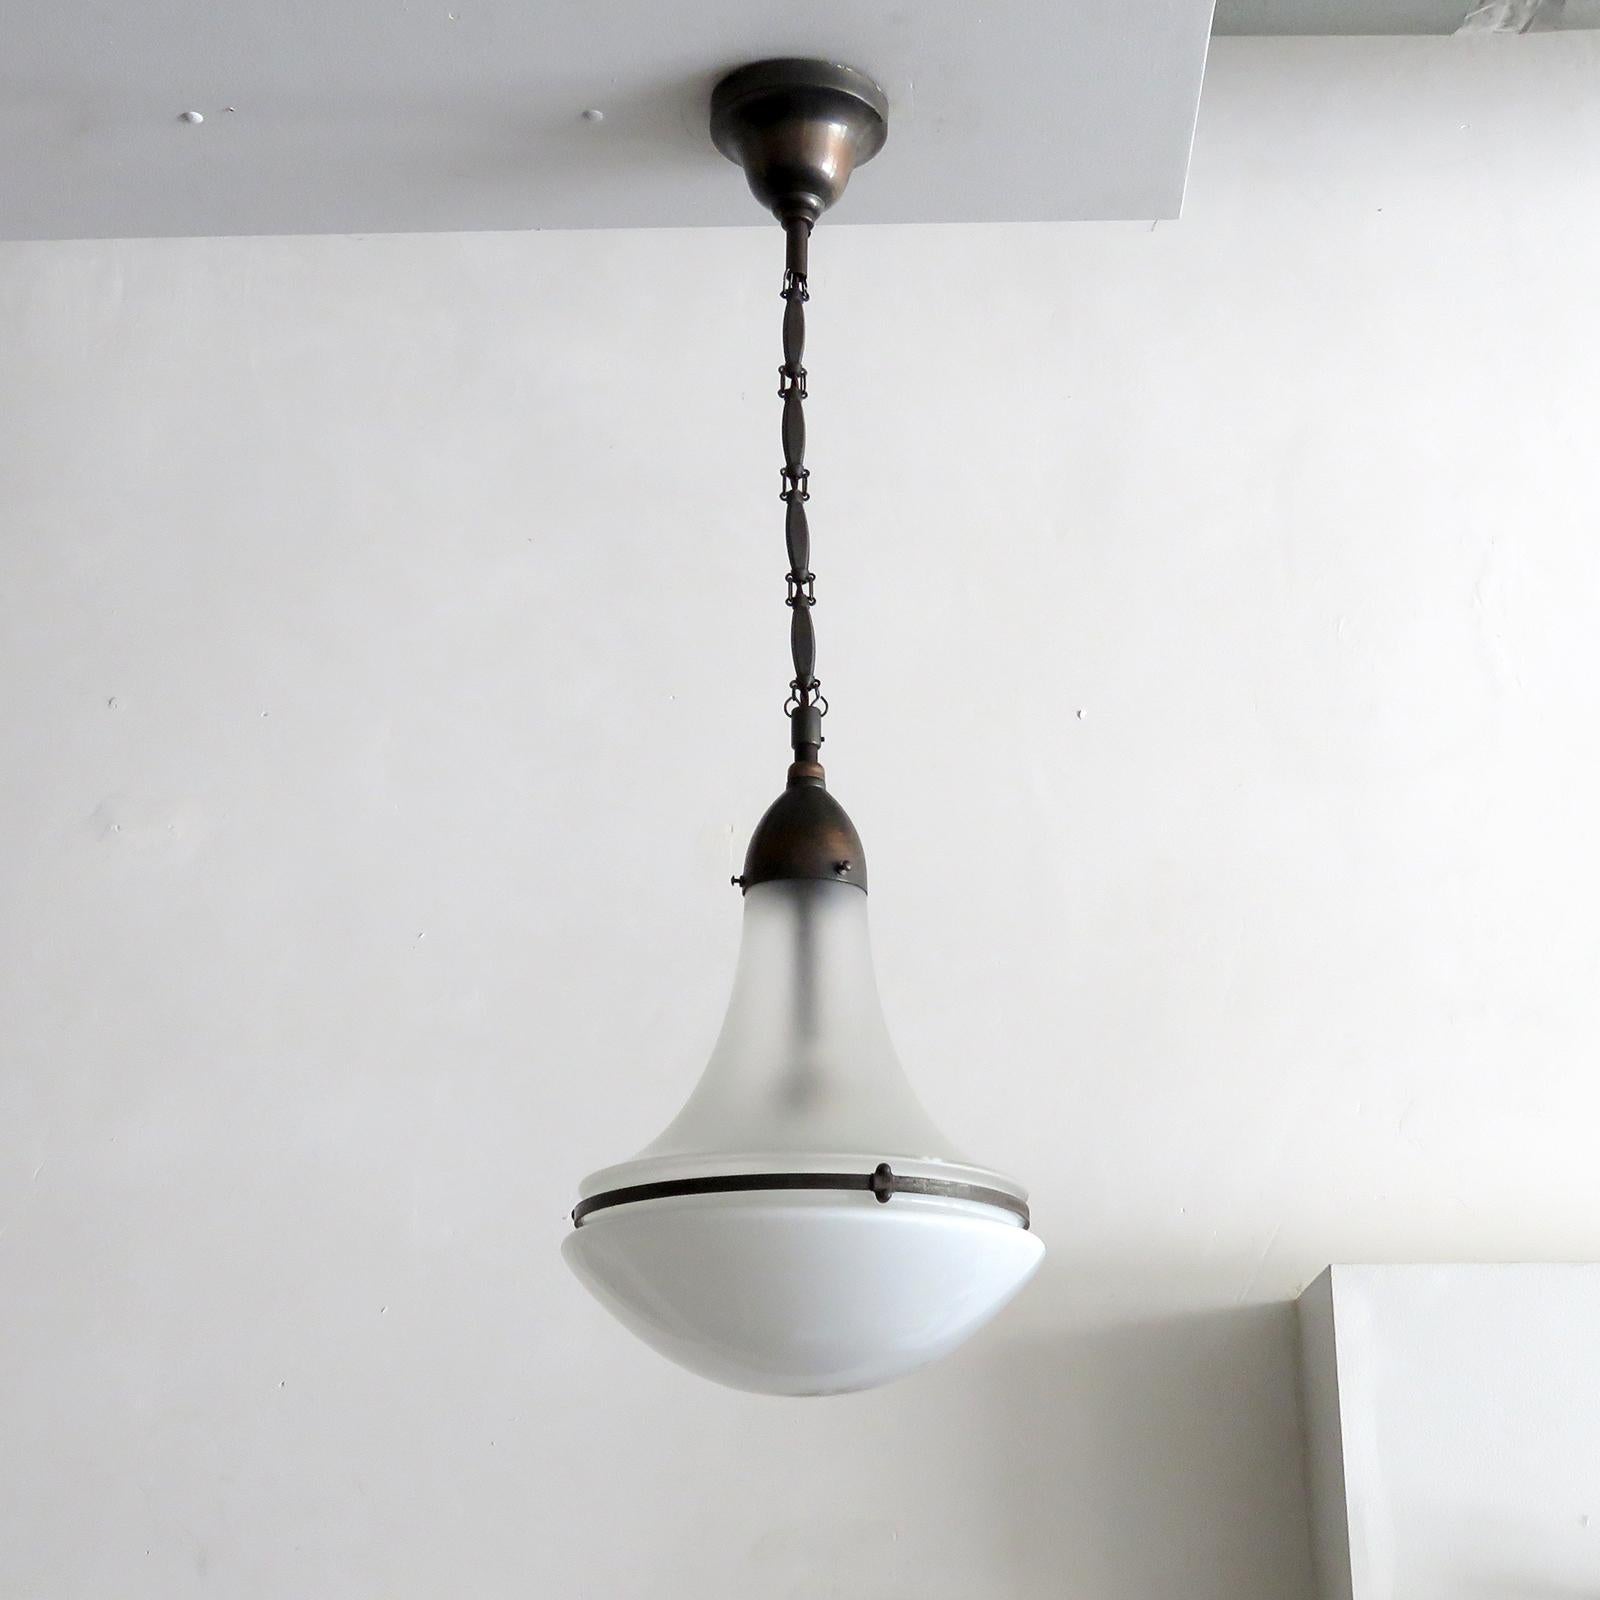 rare pendant 'Luzette 1509' in milk glass and frosted glass by by Siemens-Schuckert Werke, 1920, wired for US standards, one E26 socket, max. wattage 75w or 3-7w LED equivalent, bulb provided as a onetime courtesy.